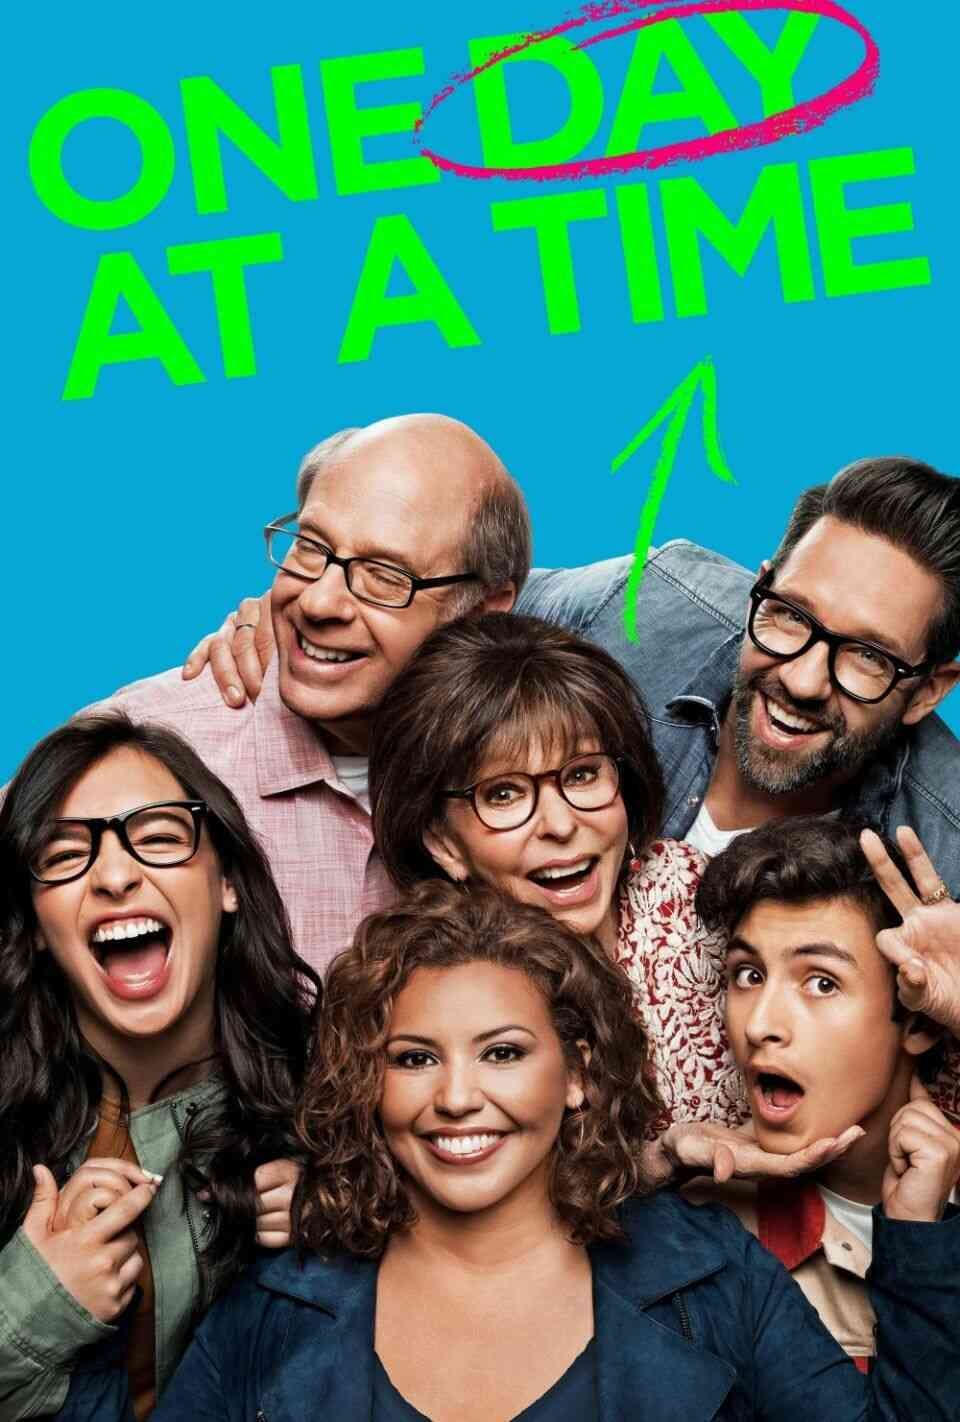 Read One Day at a Time screenplay (poster)